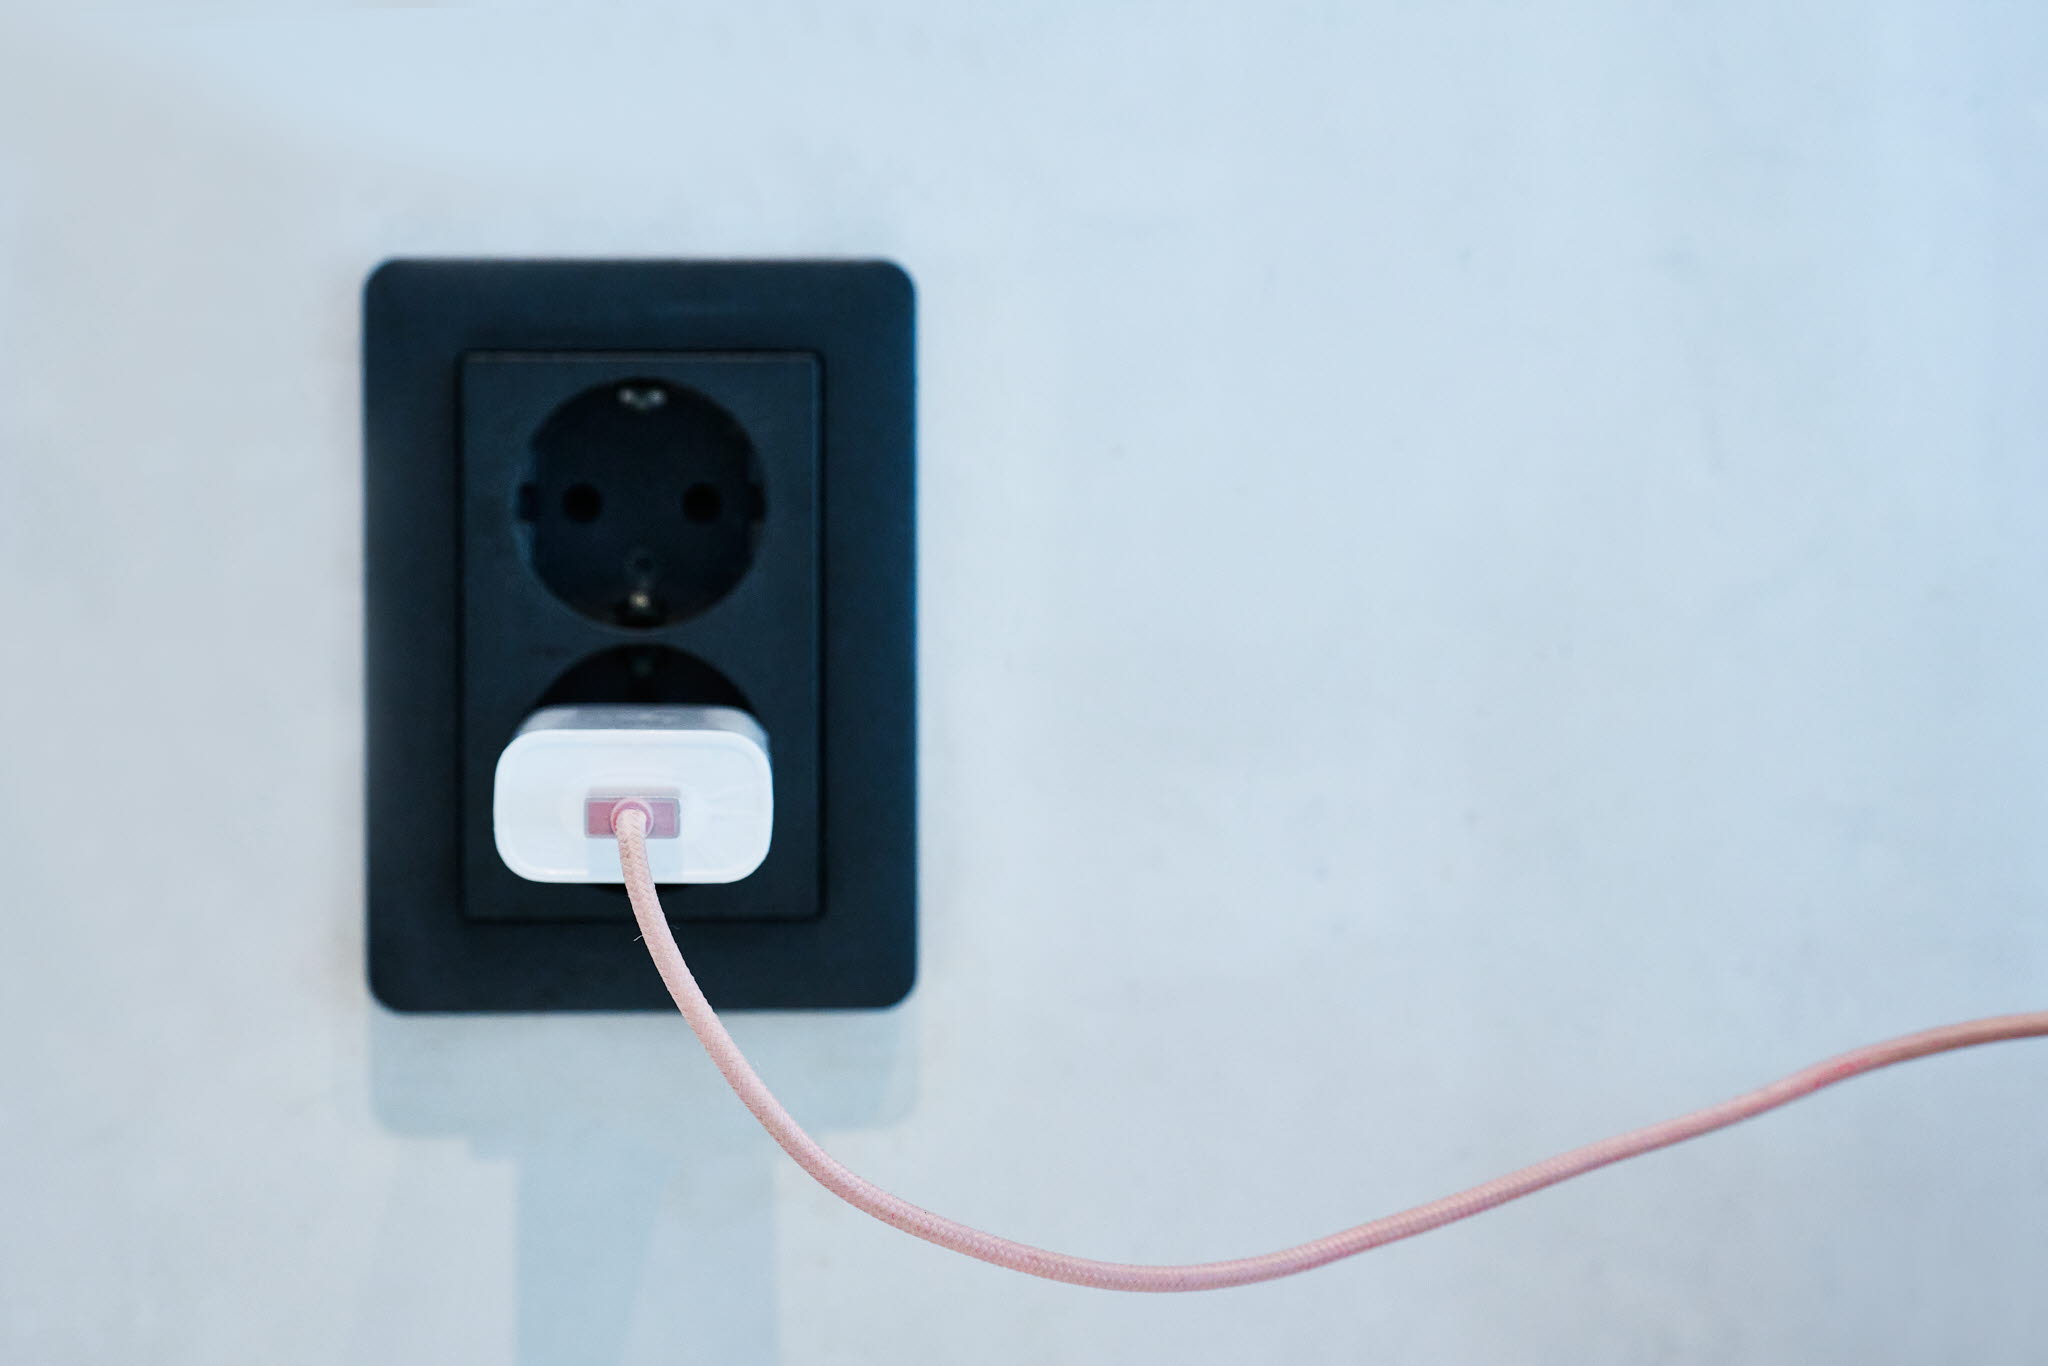 A white plug with a beige cord is plugged into a black wall socket.